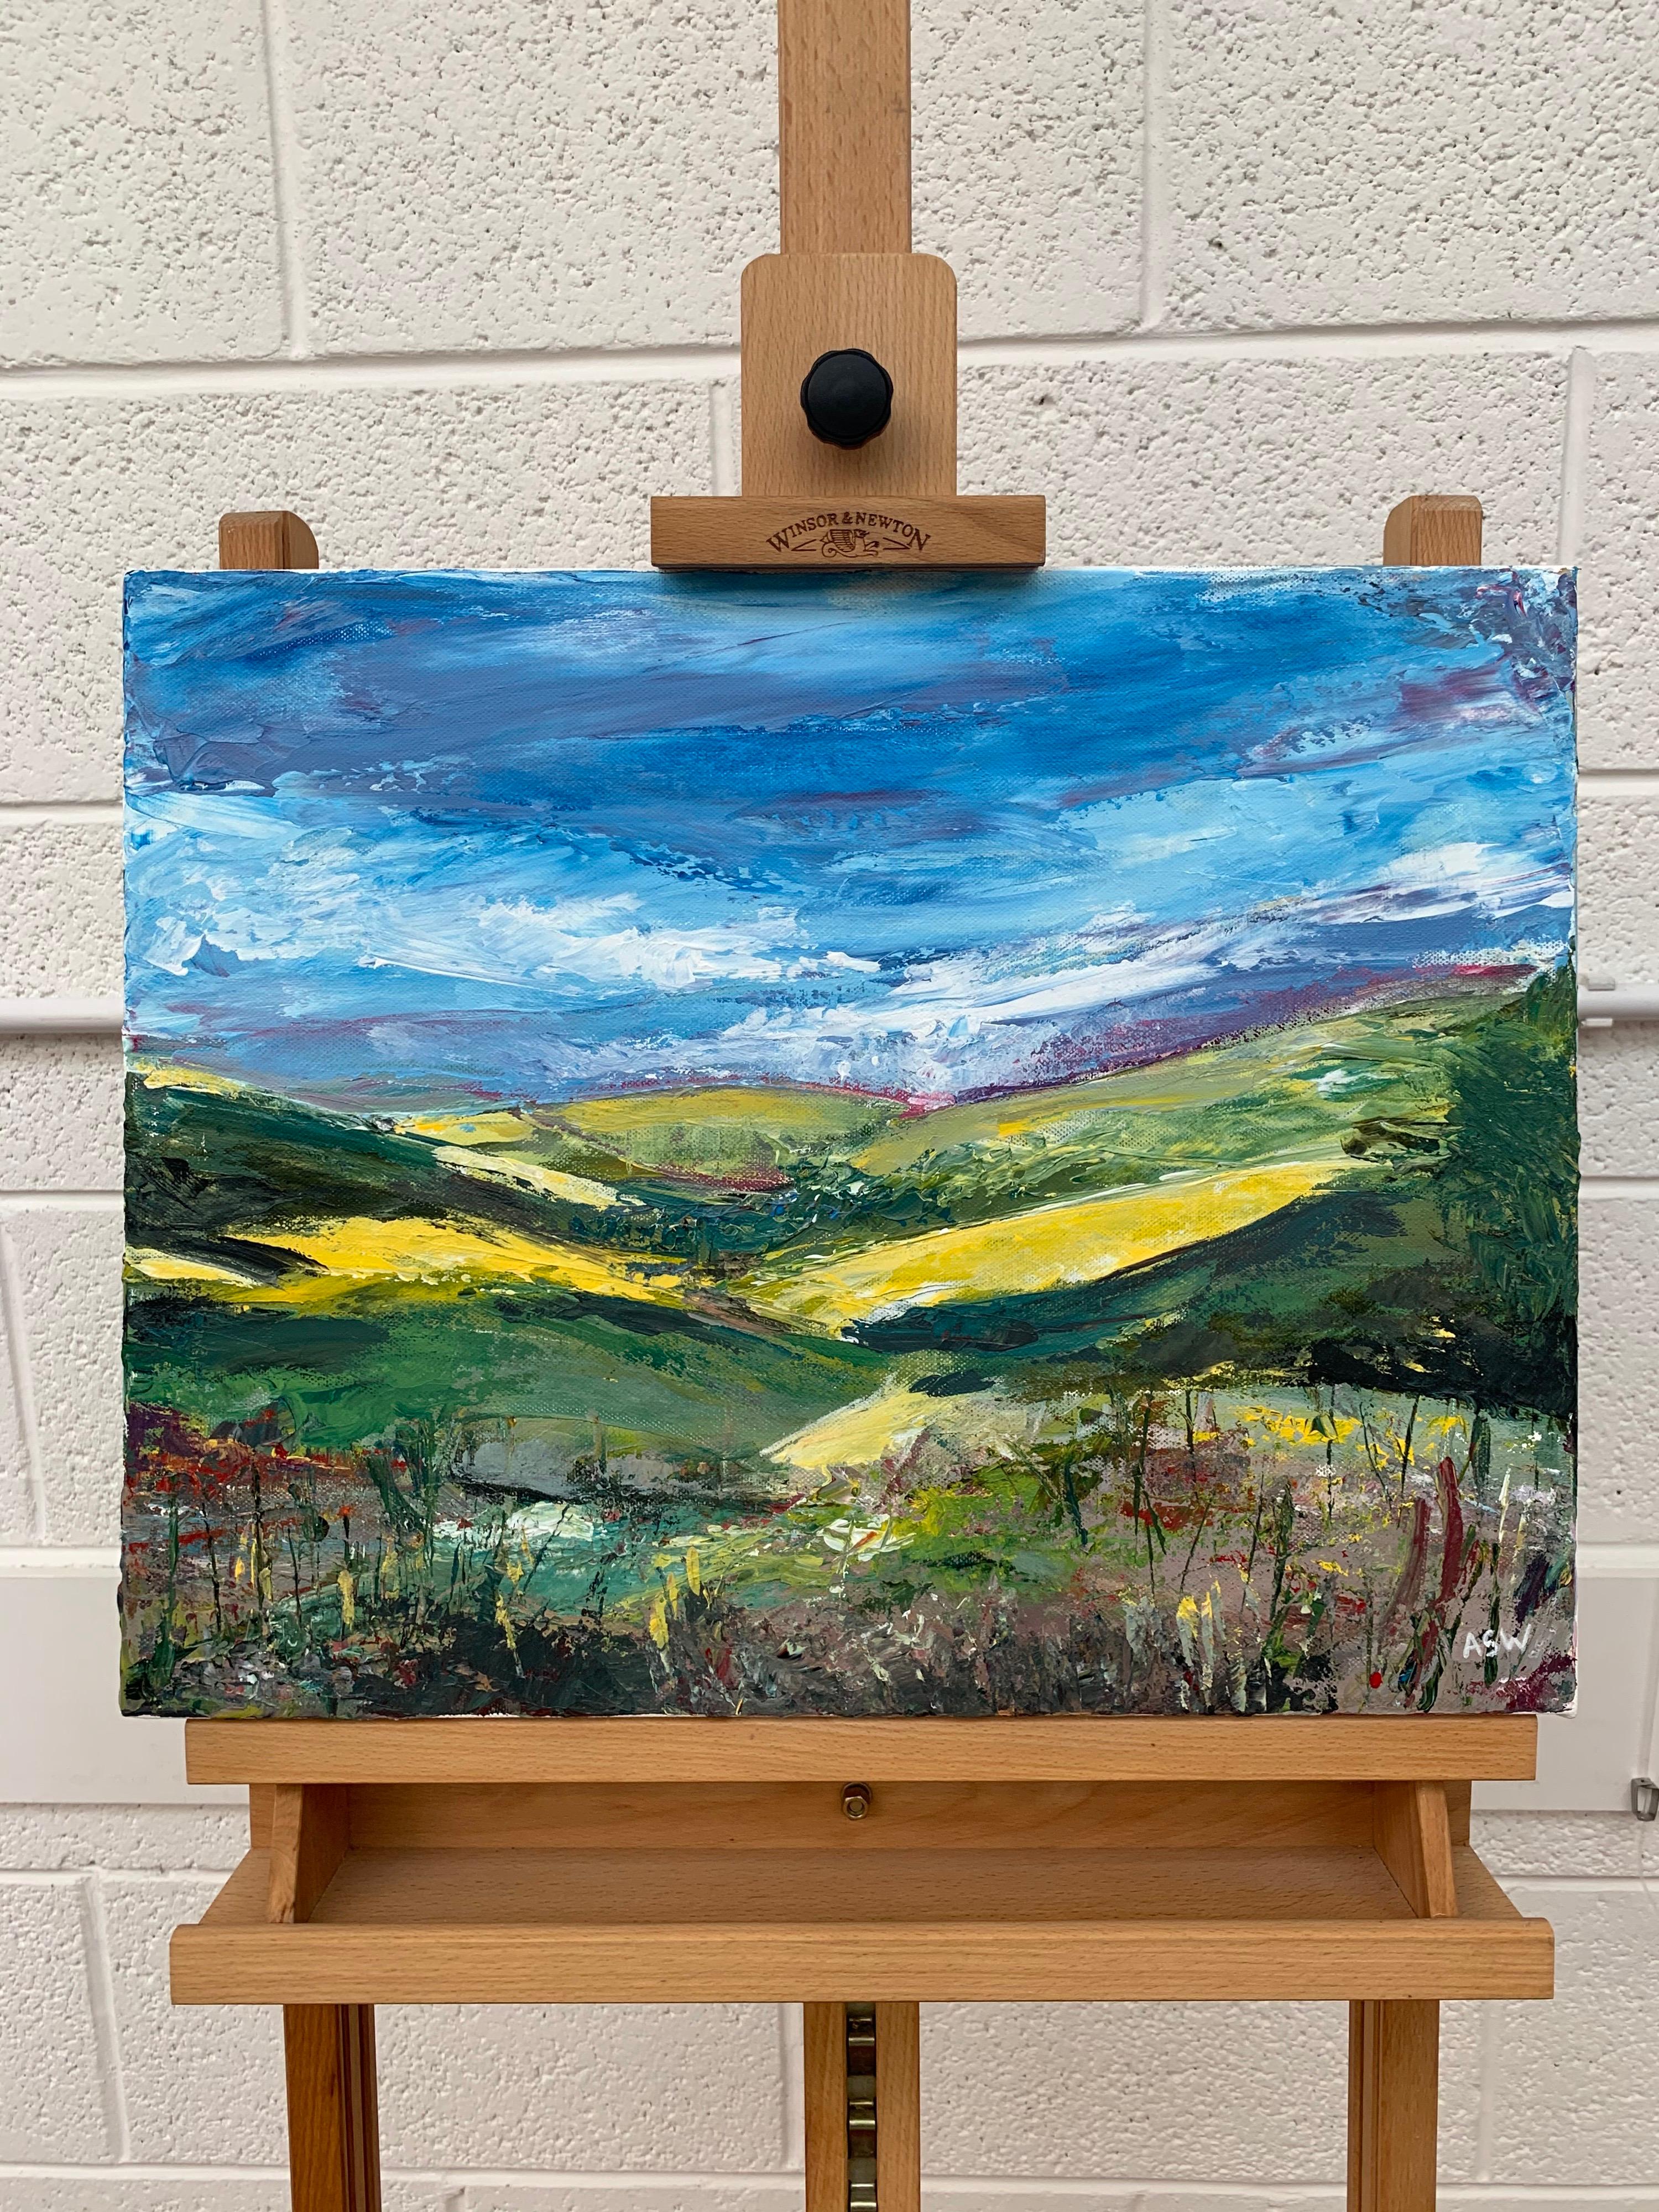 Colourful Expressive Abstract Landscape Scene by Contemporary British Artist

Art measures 20 x 16 inches
Frame measures 26 x 22 inches

Angela Wakefield has twice been on the front cover of ‘Art of England’ and featured in ARTnews, attracting